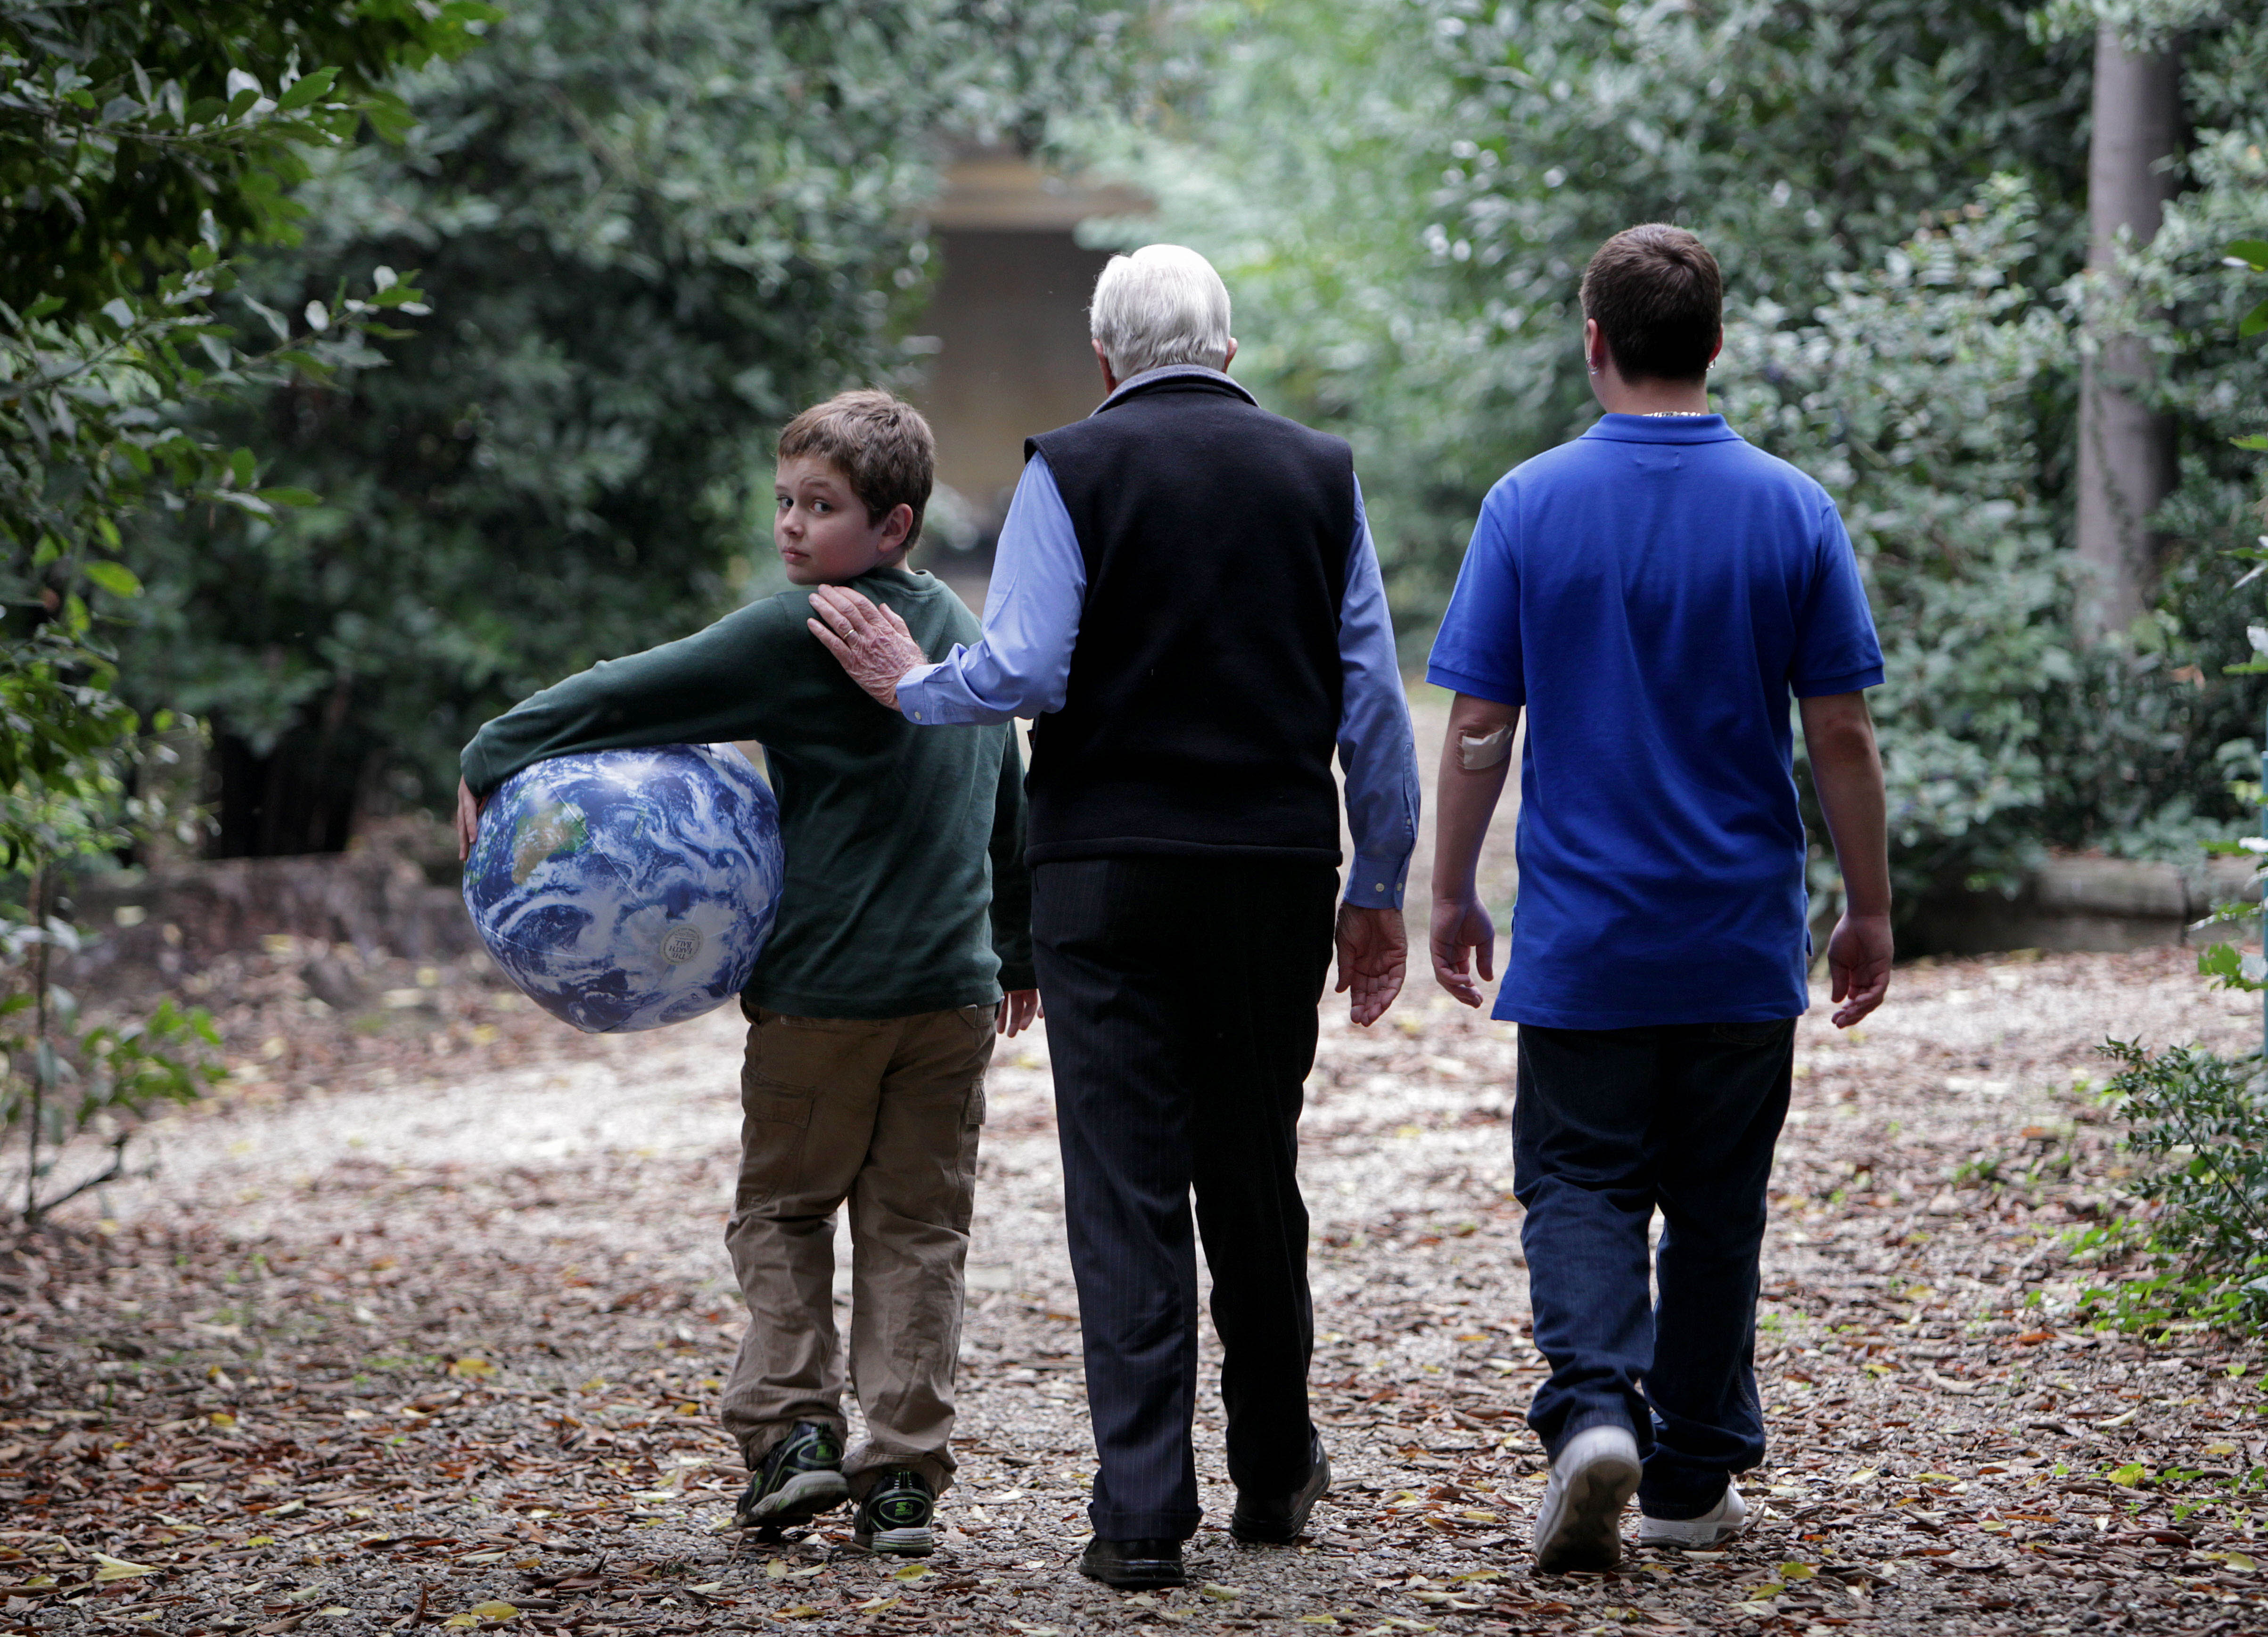 Jimmy Carter walks with his grandsons Jeremy Carter and Hugo Wentzel during a picnic event in Istanbul, Turkey, on October 31, 2009. | Source: Getty Images